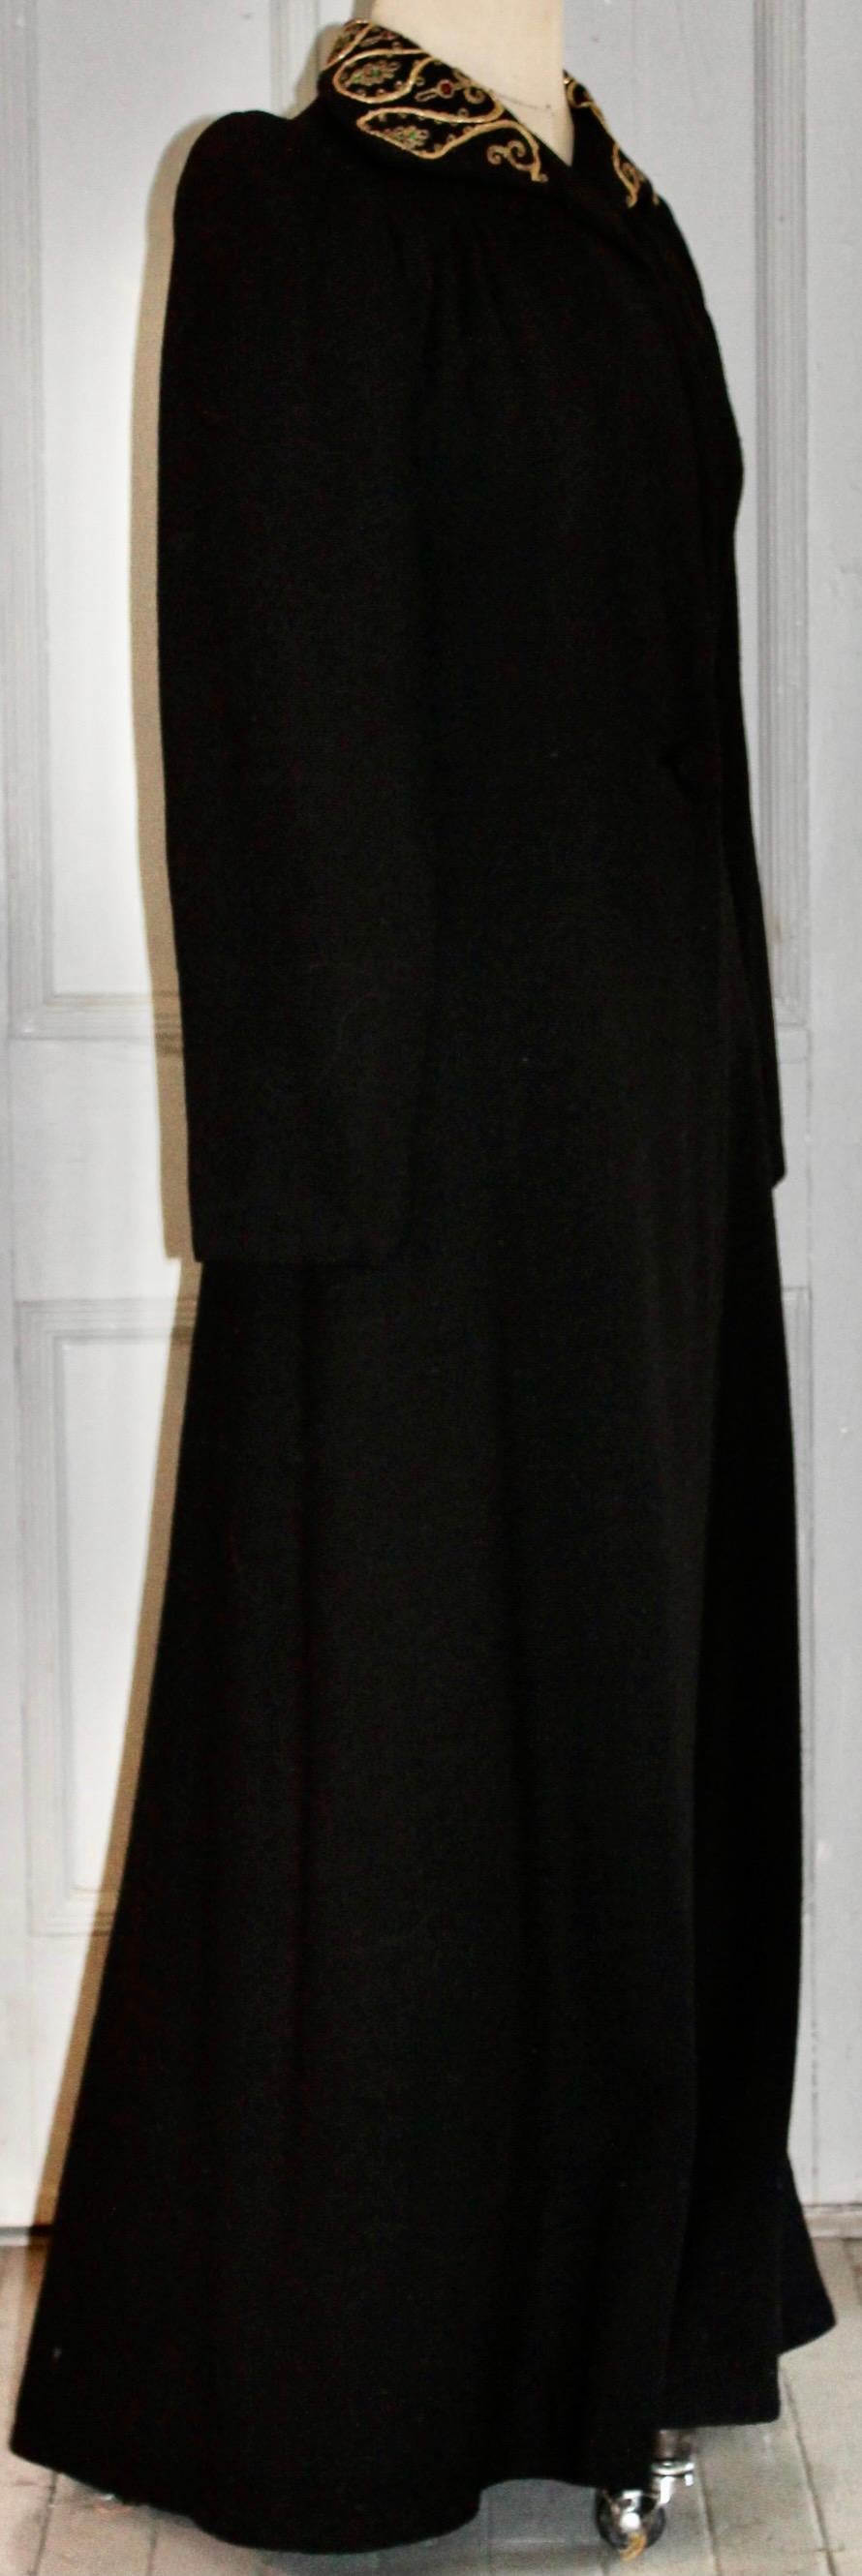 Edwardian Black Wool Coat with Faux Jewels For Sale 1